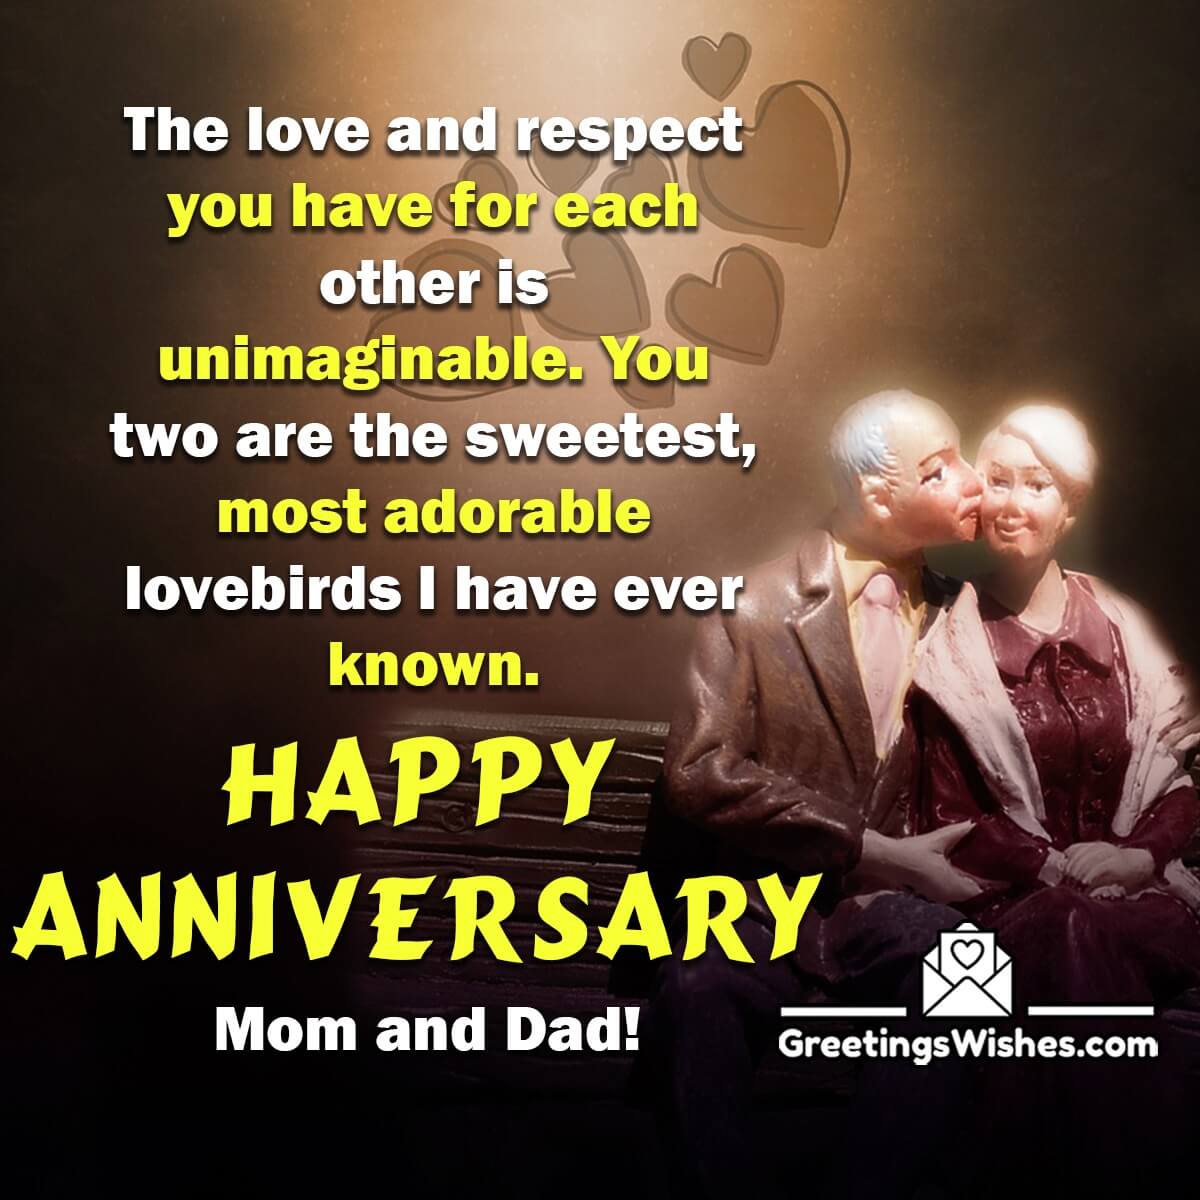 Happy Marriage Anniversary Wishes - Greetings Wishes